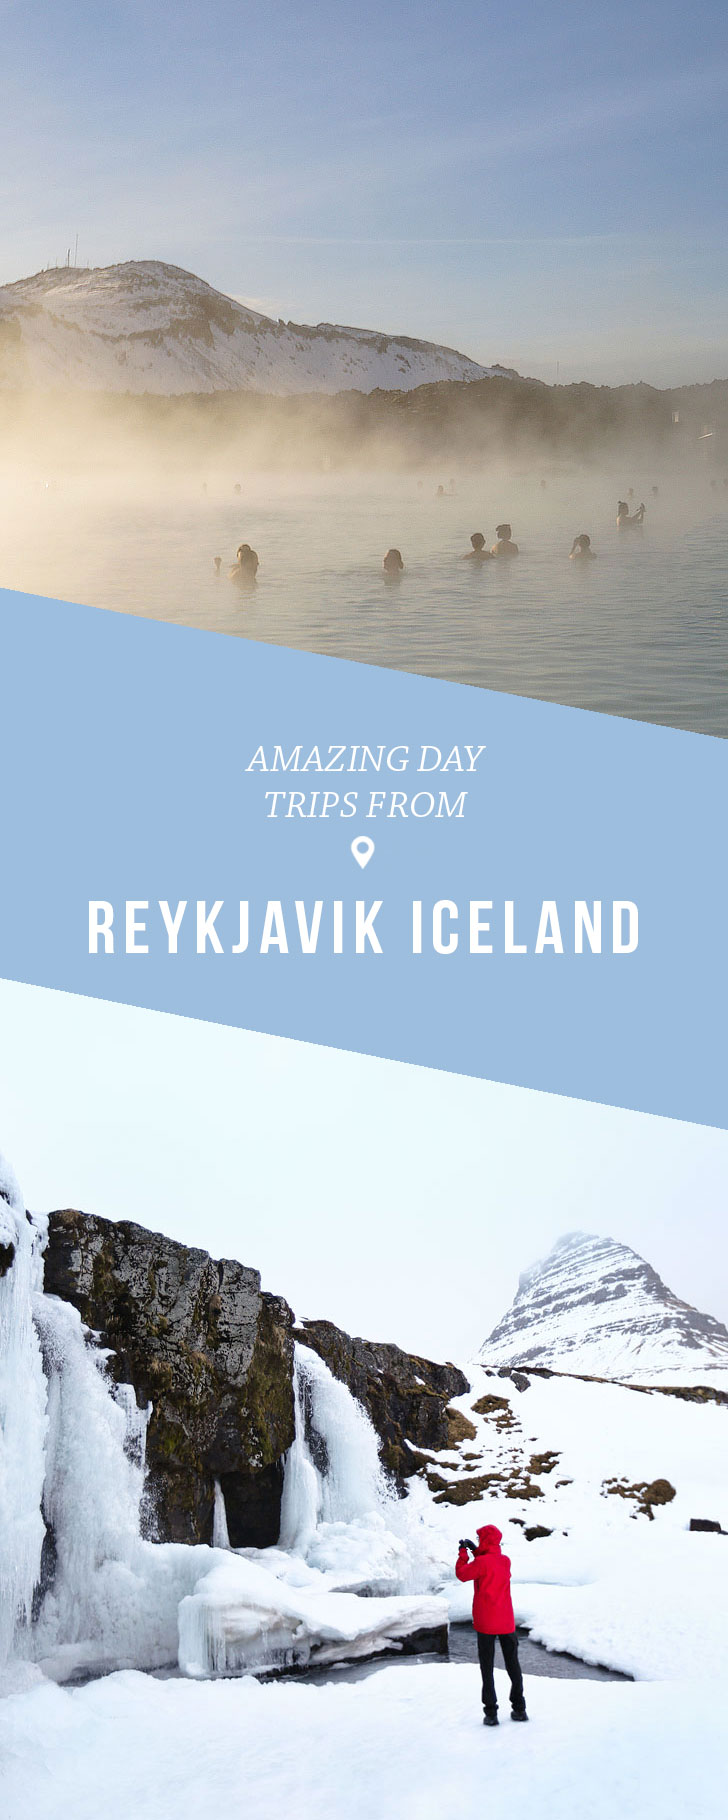 5 Top Day Trips from Reykjavik Iceland You Can’t Miss | Best Places to Drive to in Iceland - Are you traveling to Iceland? Click the article to see the beautiful places that are only a day trip away from Reykjavik. Why you should visit them, Iceland road trip travel tips, and what to do in Reykjavik // Local Adventurer #reykjavik #roadtrip #iceland